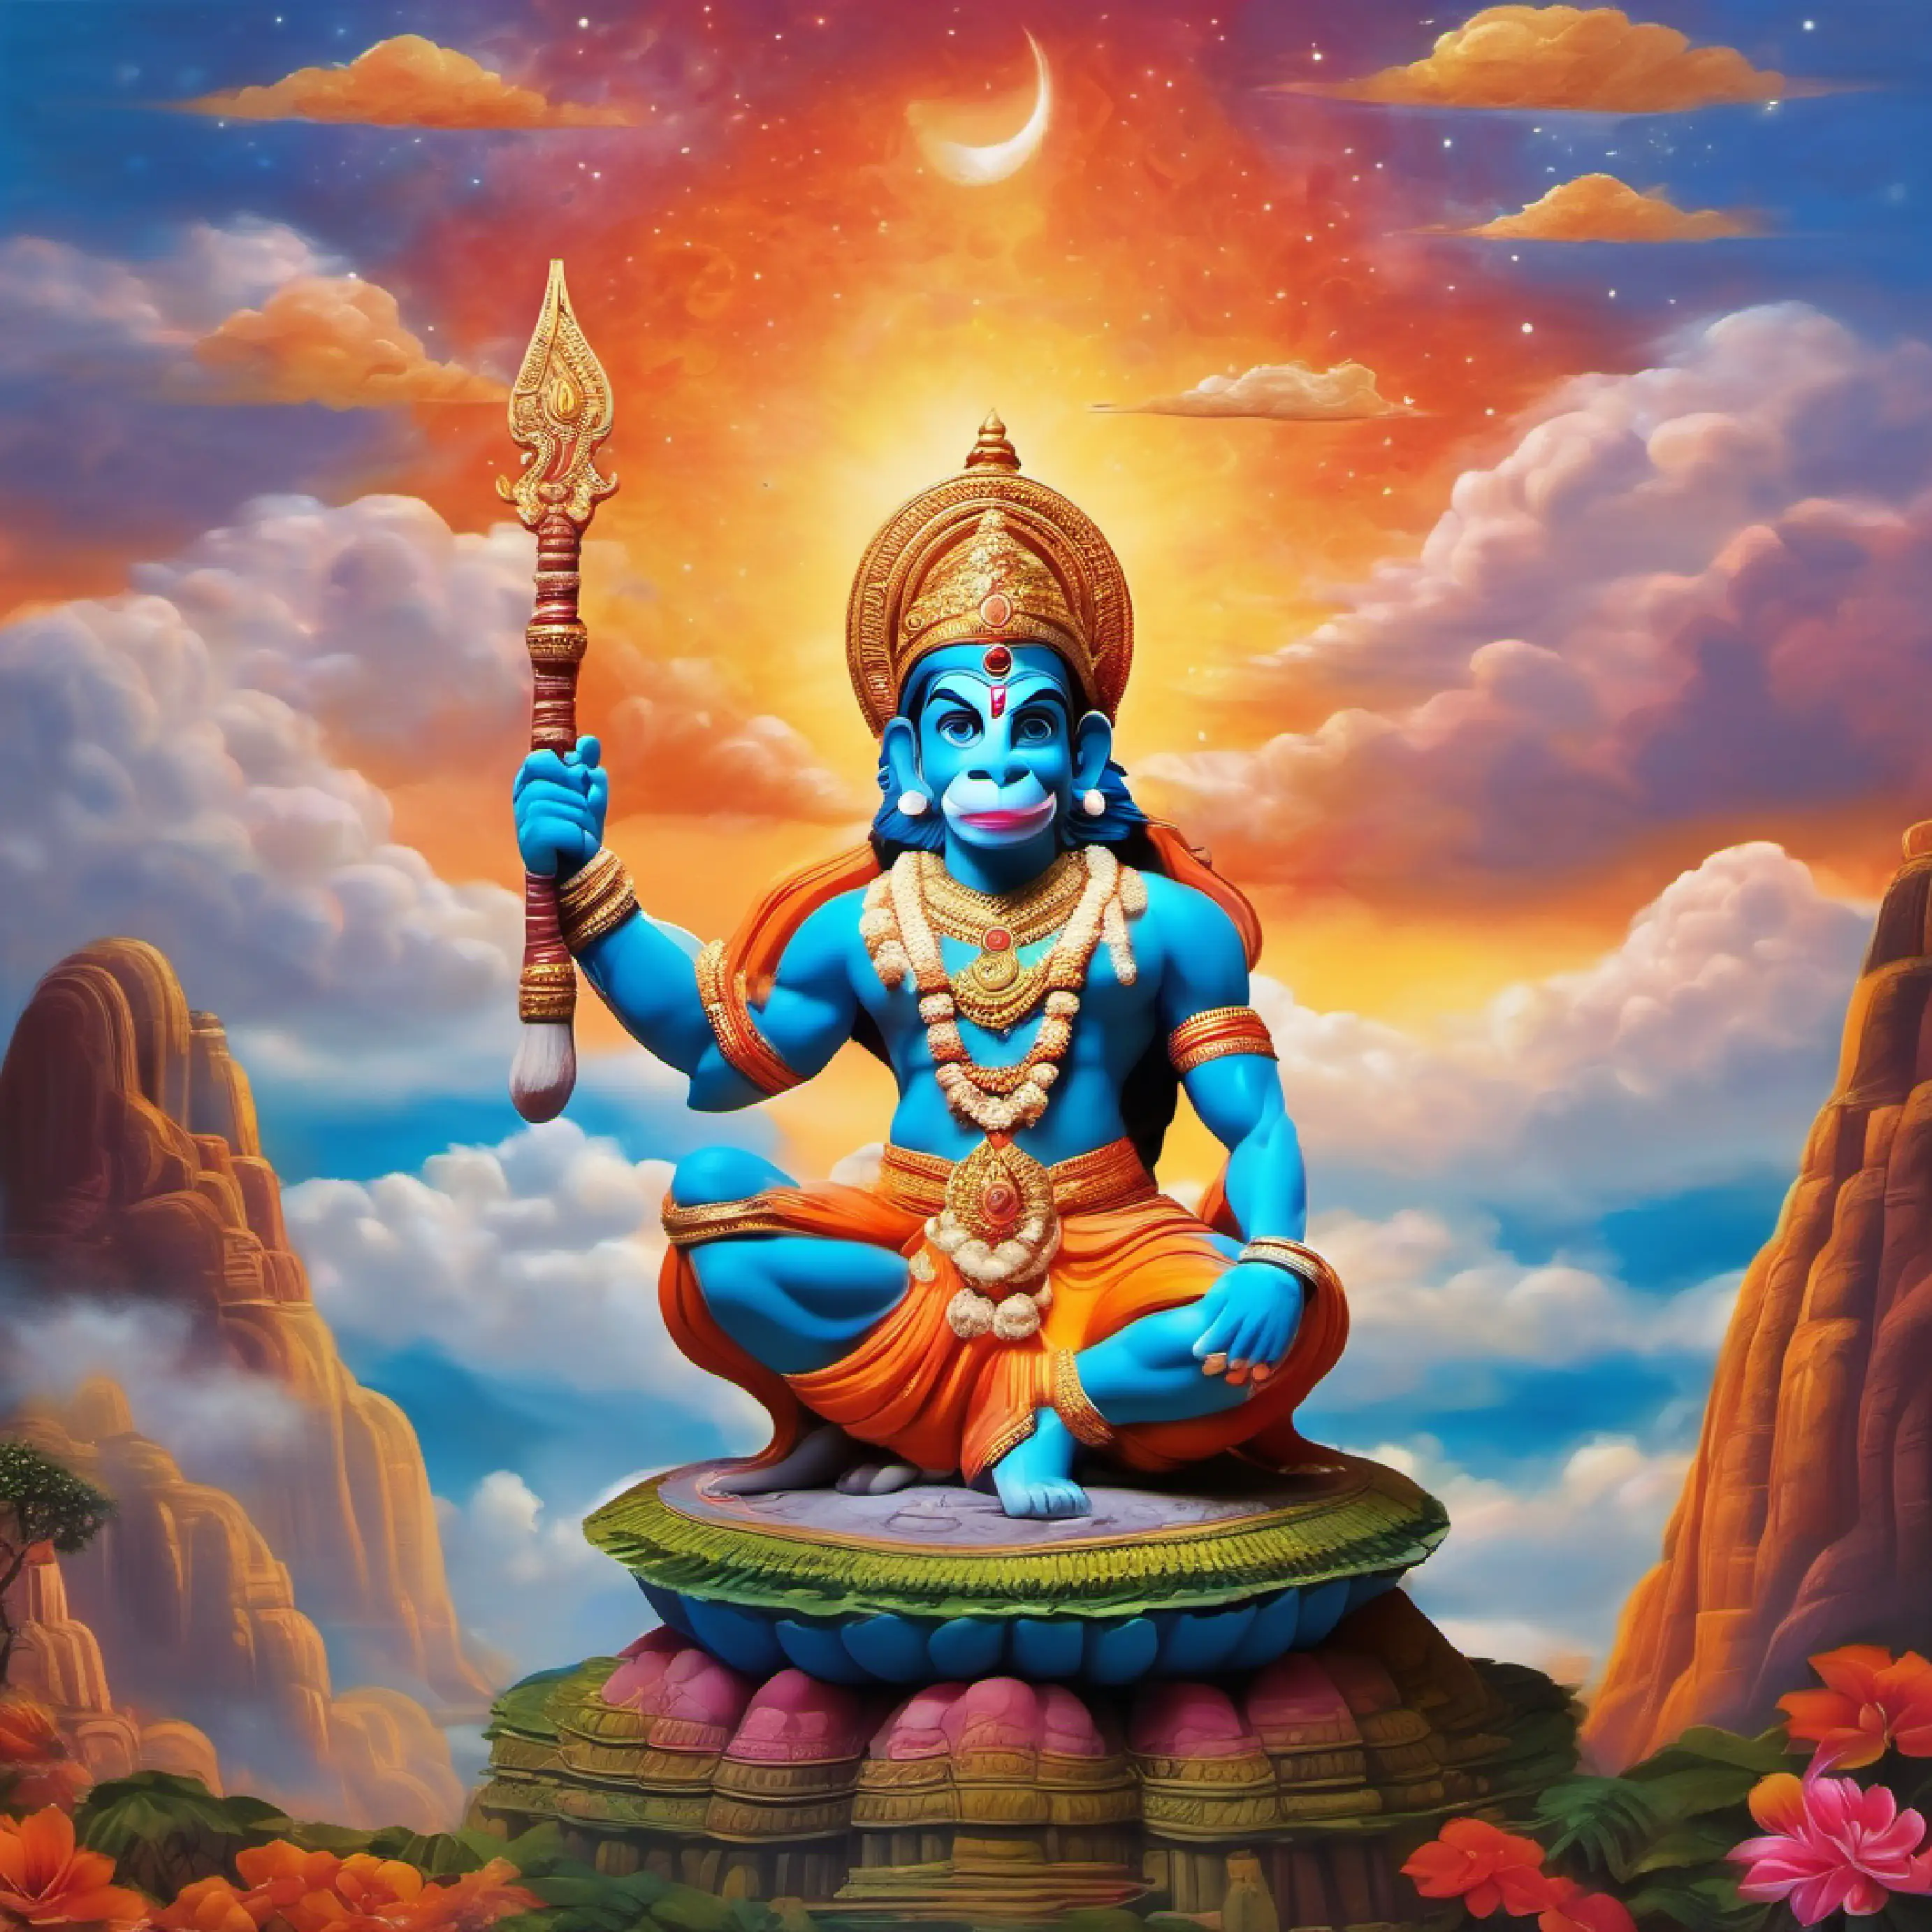 Visualize Hanuman in a majestic stance against a backdrop of a vibrant, celestial landscape. The background could include ethereal clouds, subtle hints of divine energy, and perhaps an image of Lord Rama and Sita in the heavens, signifying Hanuman's undying loyalty. Let the colors blend harmoniously, creating an atmosphere that resonates with the spiritual strength and valor embodied by Hanuman. The scene should capture the essence of his divine connection and the monumental moments from the Ramayana.